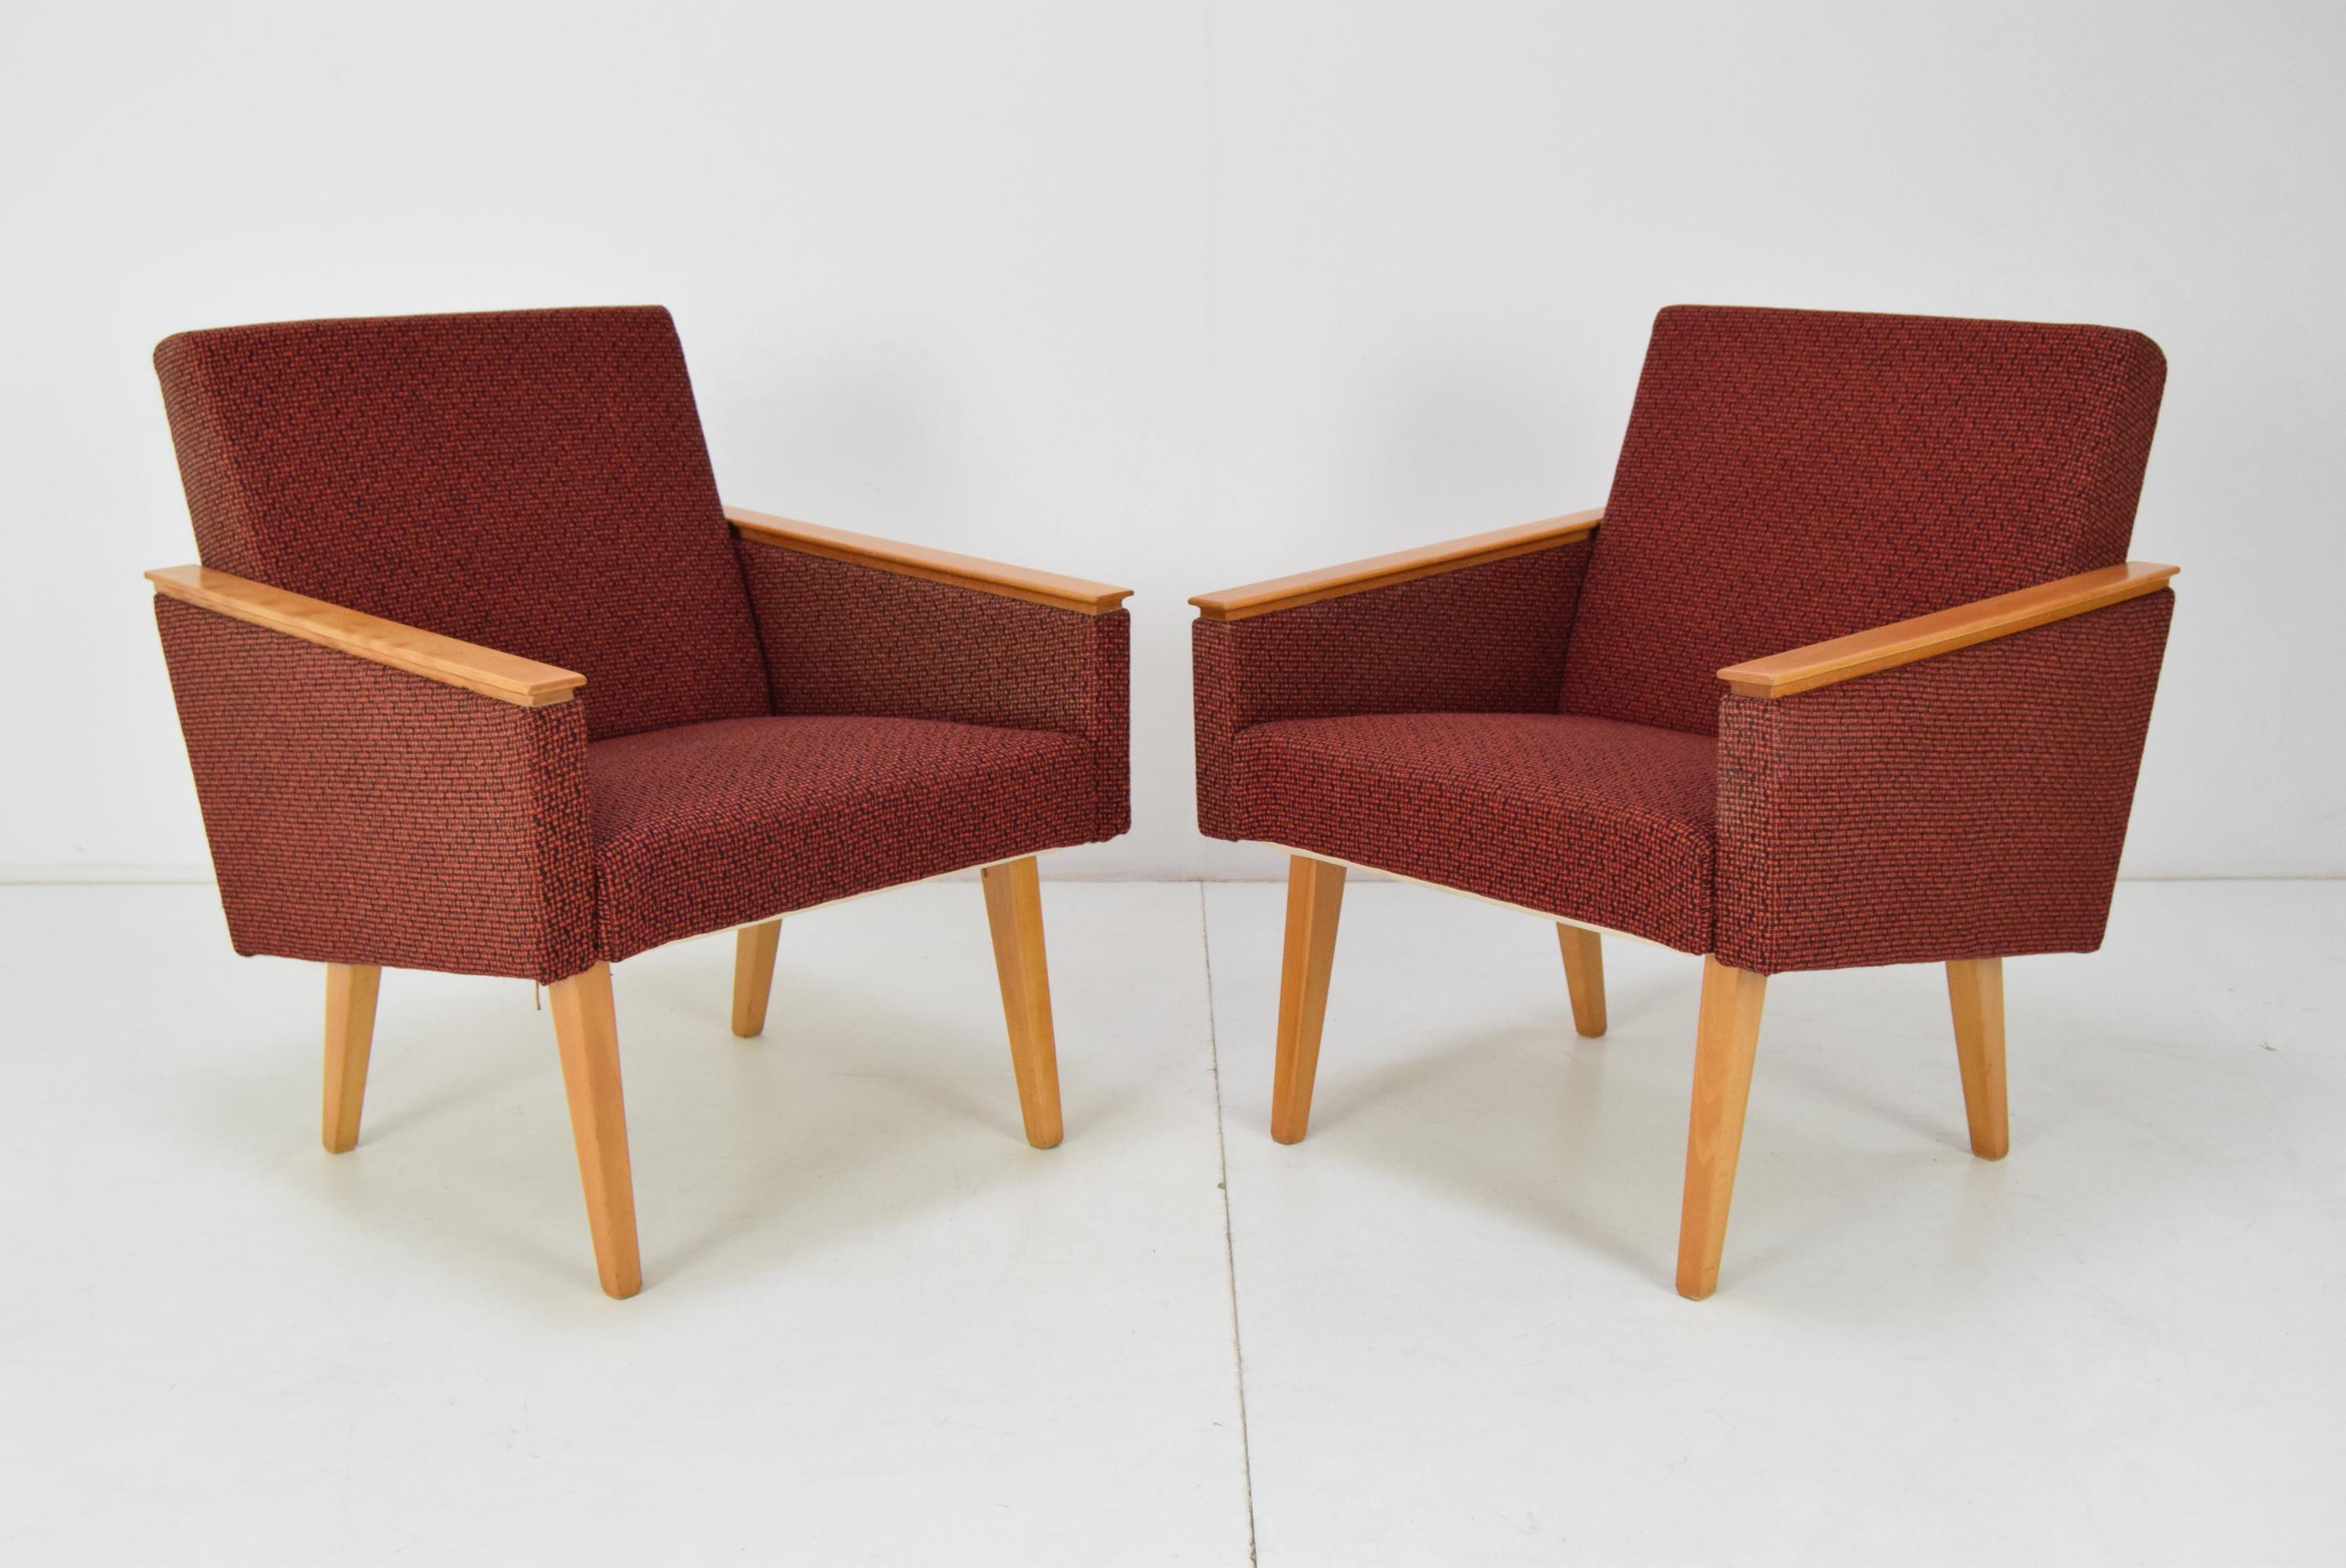 Made in Czechoslovakia
Made of fabric, wood
Upholstery has signs of use
Original condition.